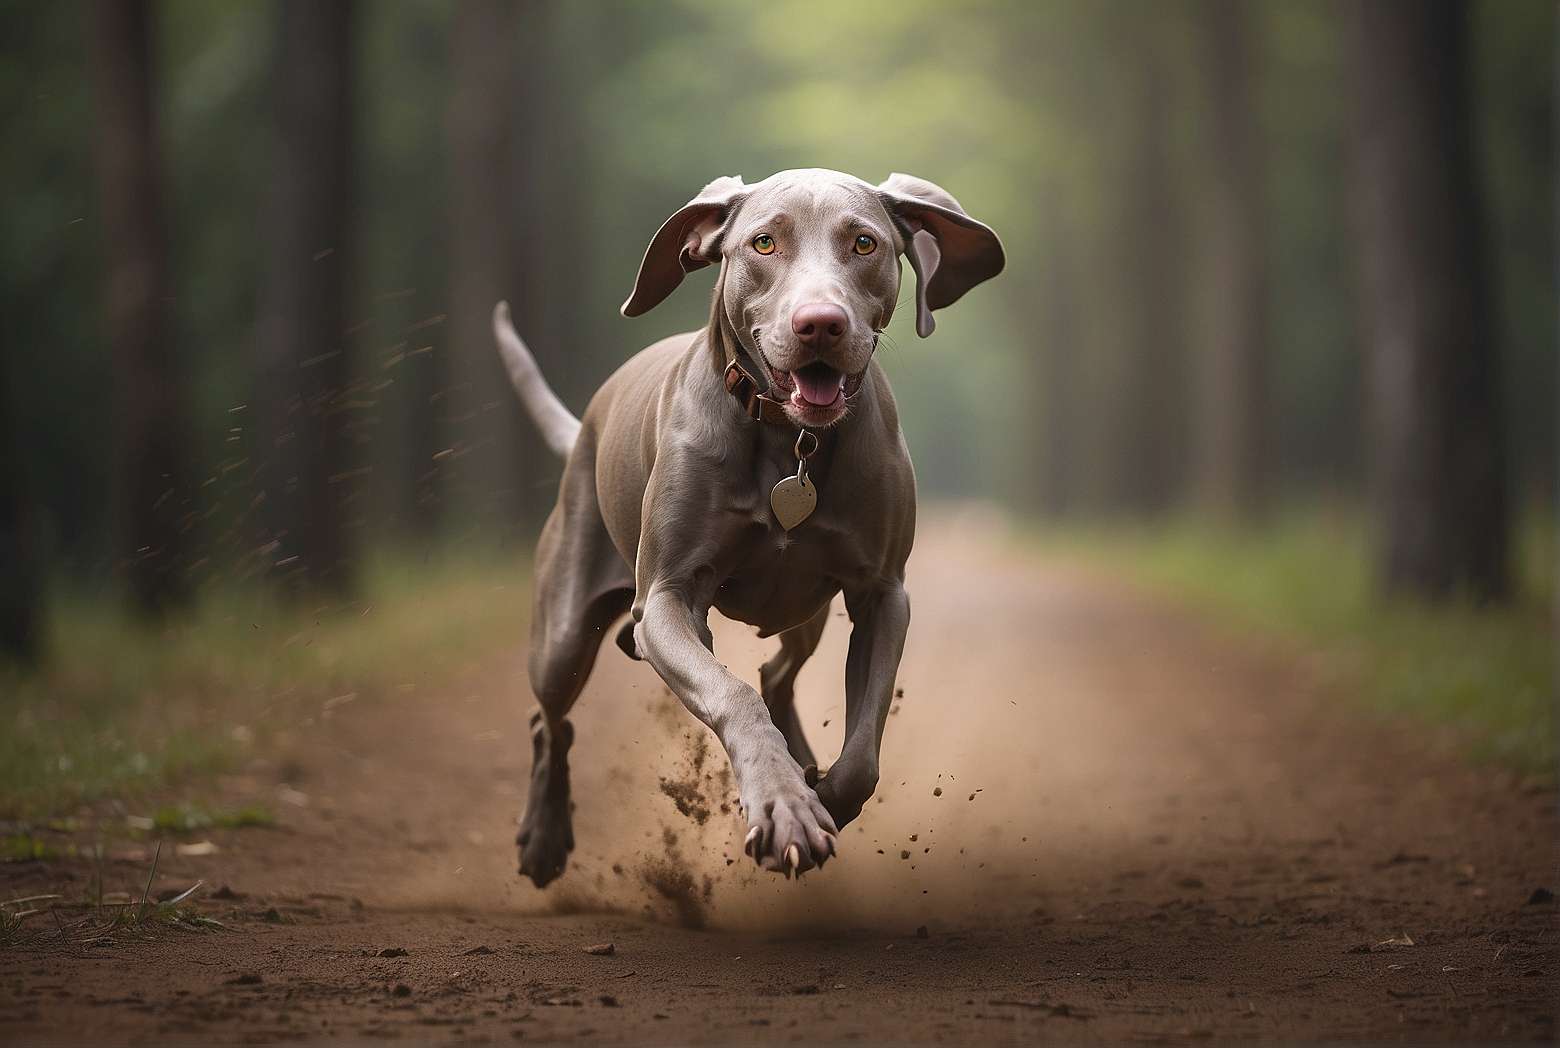 The Incredible Speed of the Weimaraner